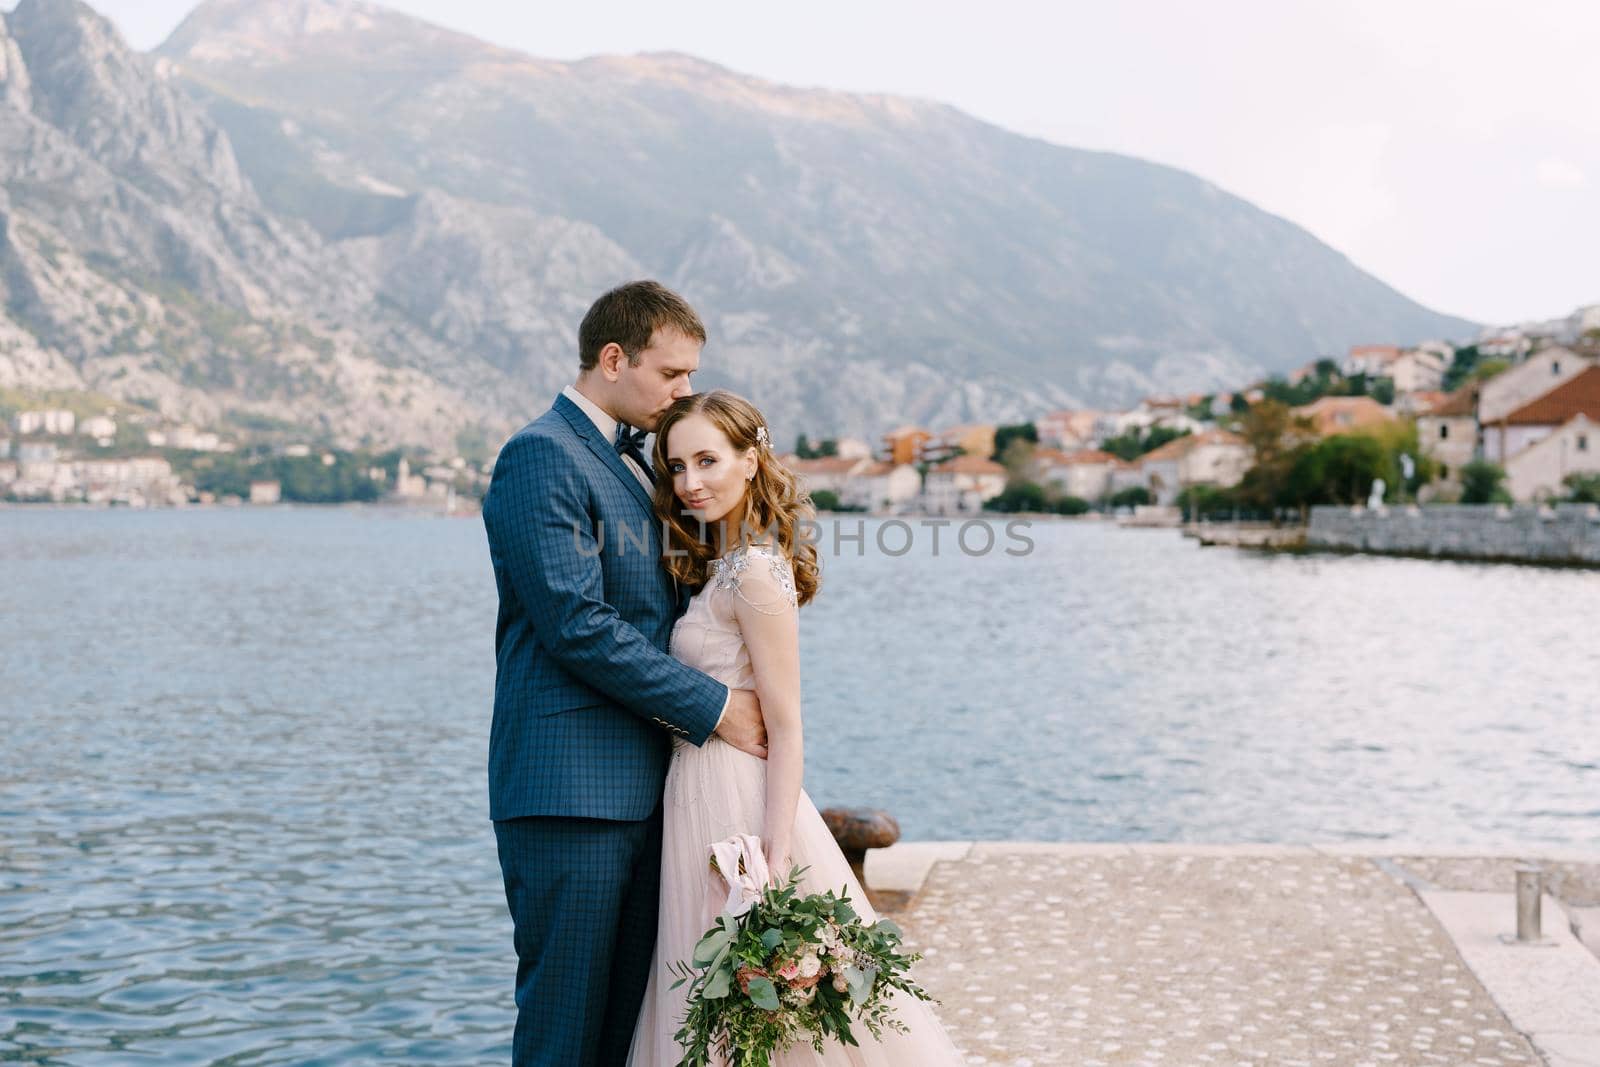 Groom hugs bride on the pier against the backdrop of mountains and the town on the coast by Nadtochiy